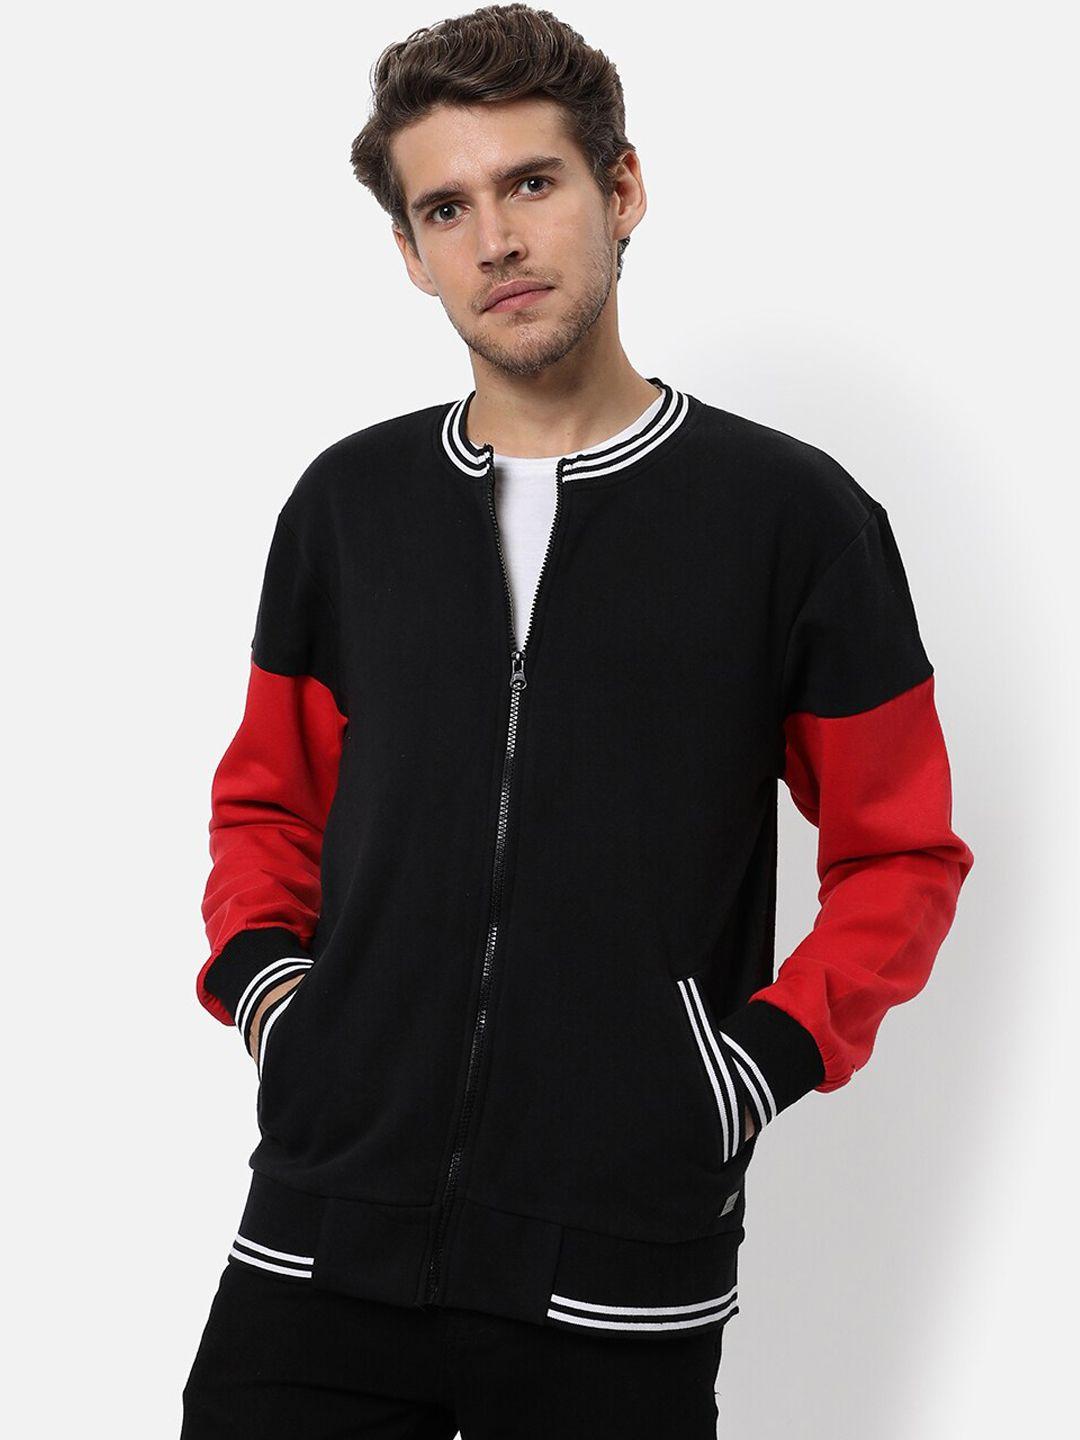 campus sutra men black & red striped windcheater outdoor tailored jacket